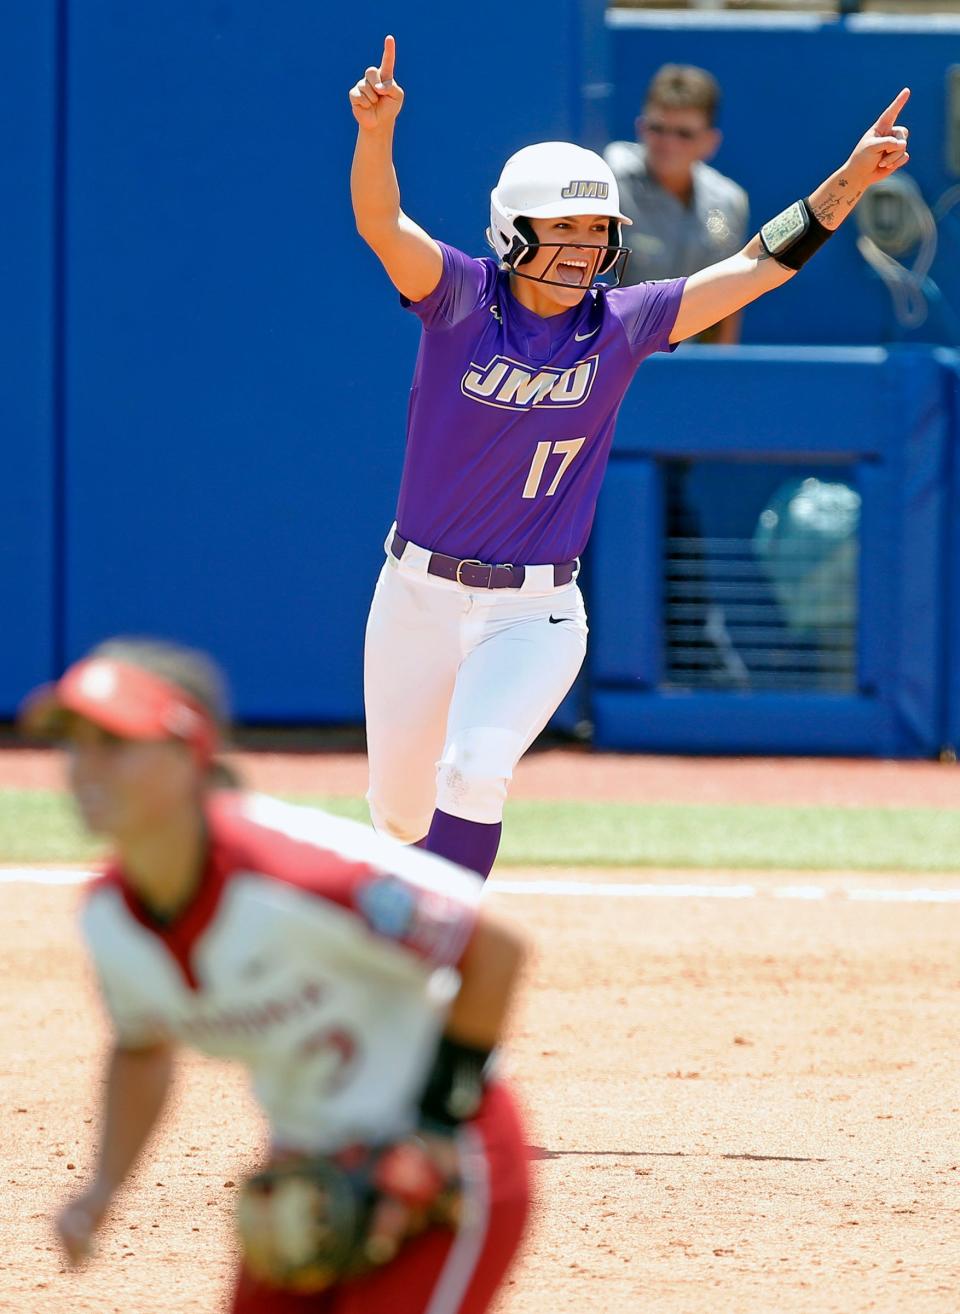 James Madison's Kate Gordon (17) celebrates her home run in the eighth inning against Oklahoma in Game 1 of the Women's College World Series.